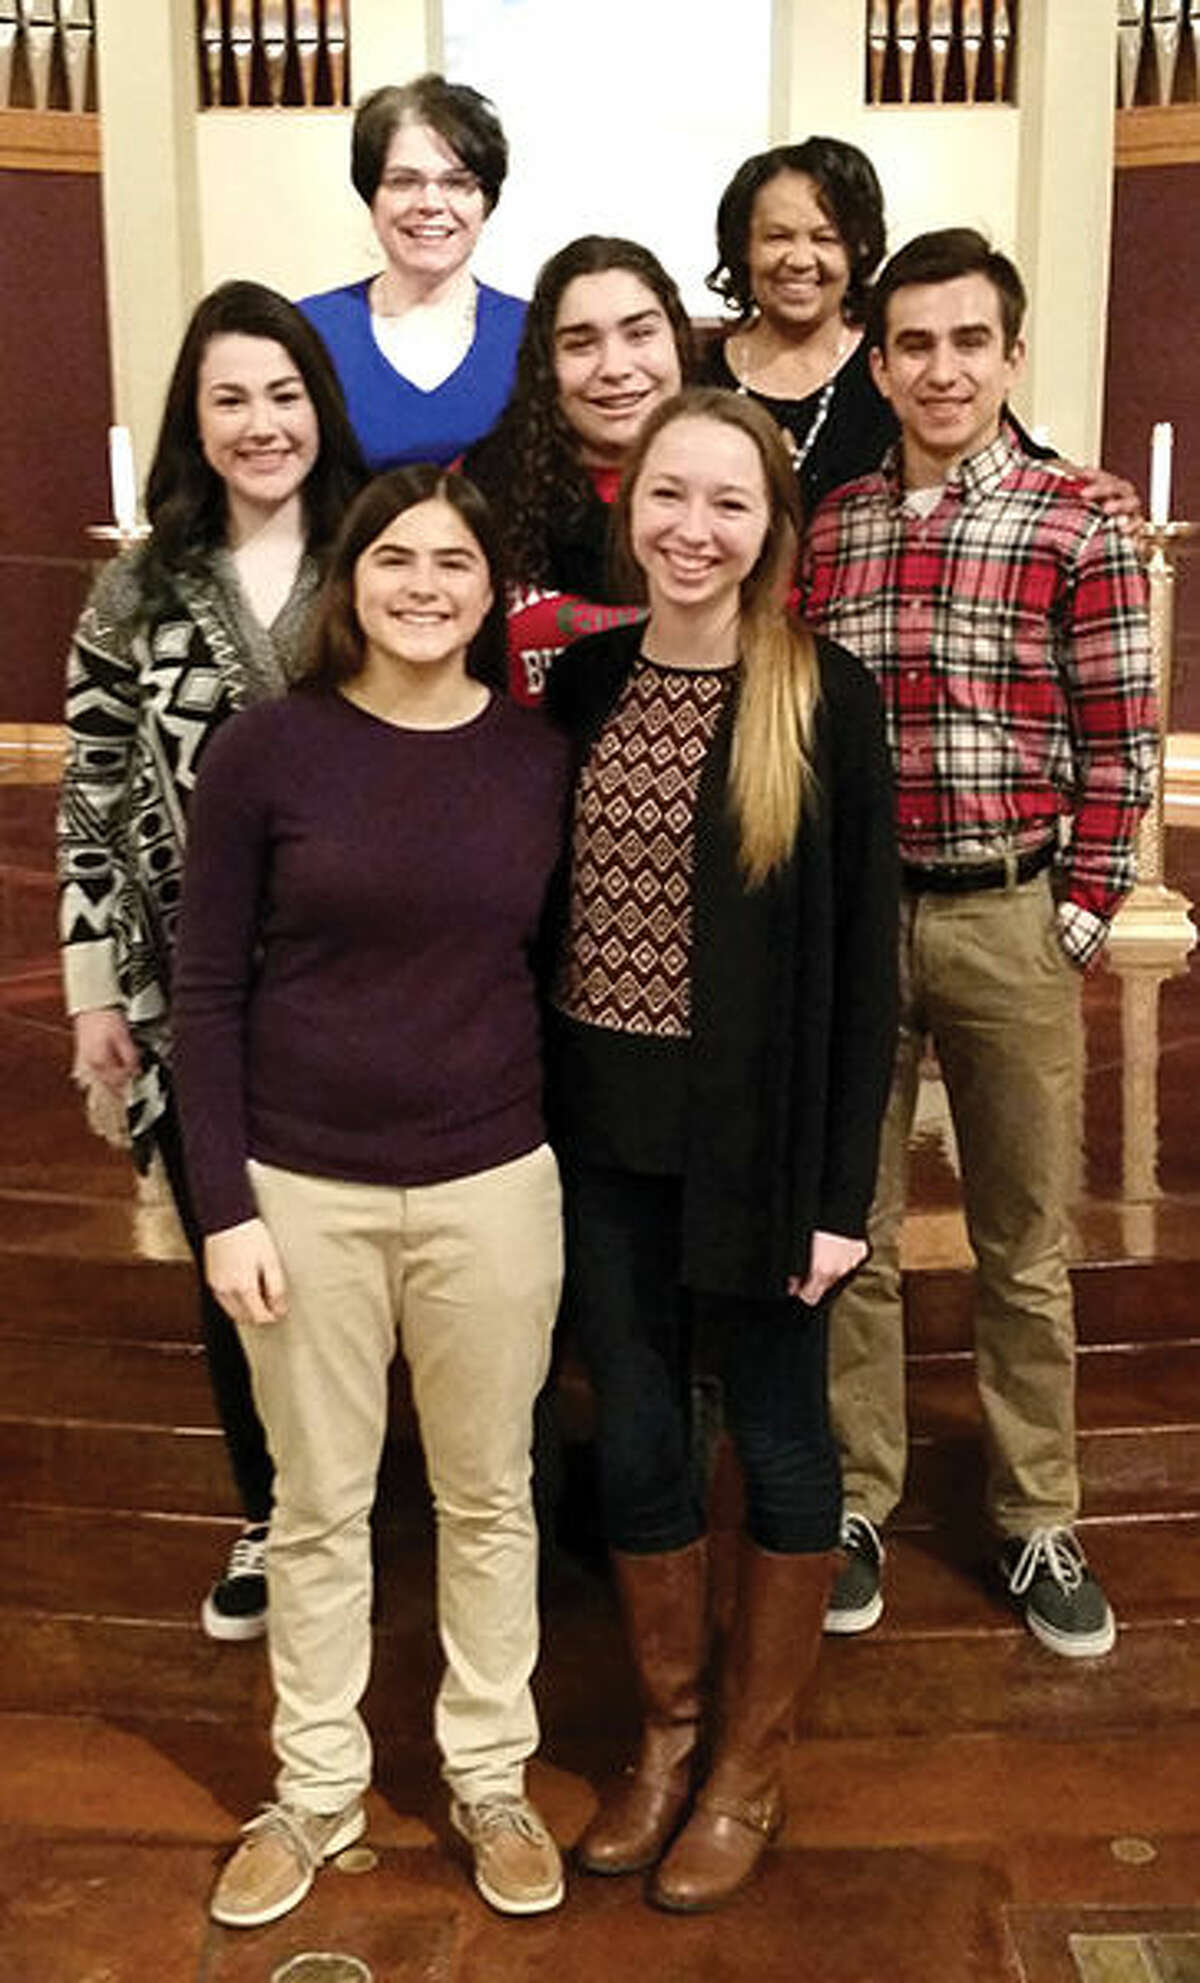 St. Boniface World Youth Day 2016 Pilgrims are: back row -  Jill Griffin (Youth Ministry Coordinator) and Joan Green (Adult Chaperone). Middle Row - Maddie Litterst,  Polly Czar and  Ryan Serfas. Front Row - Lauren Serfas and Kaitlyn Frick.